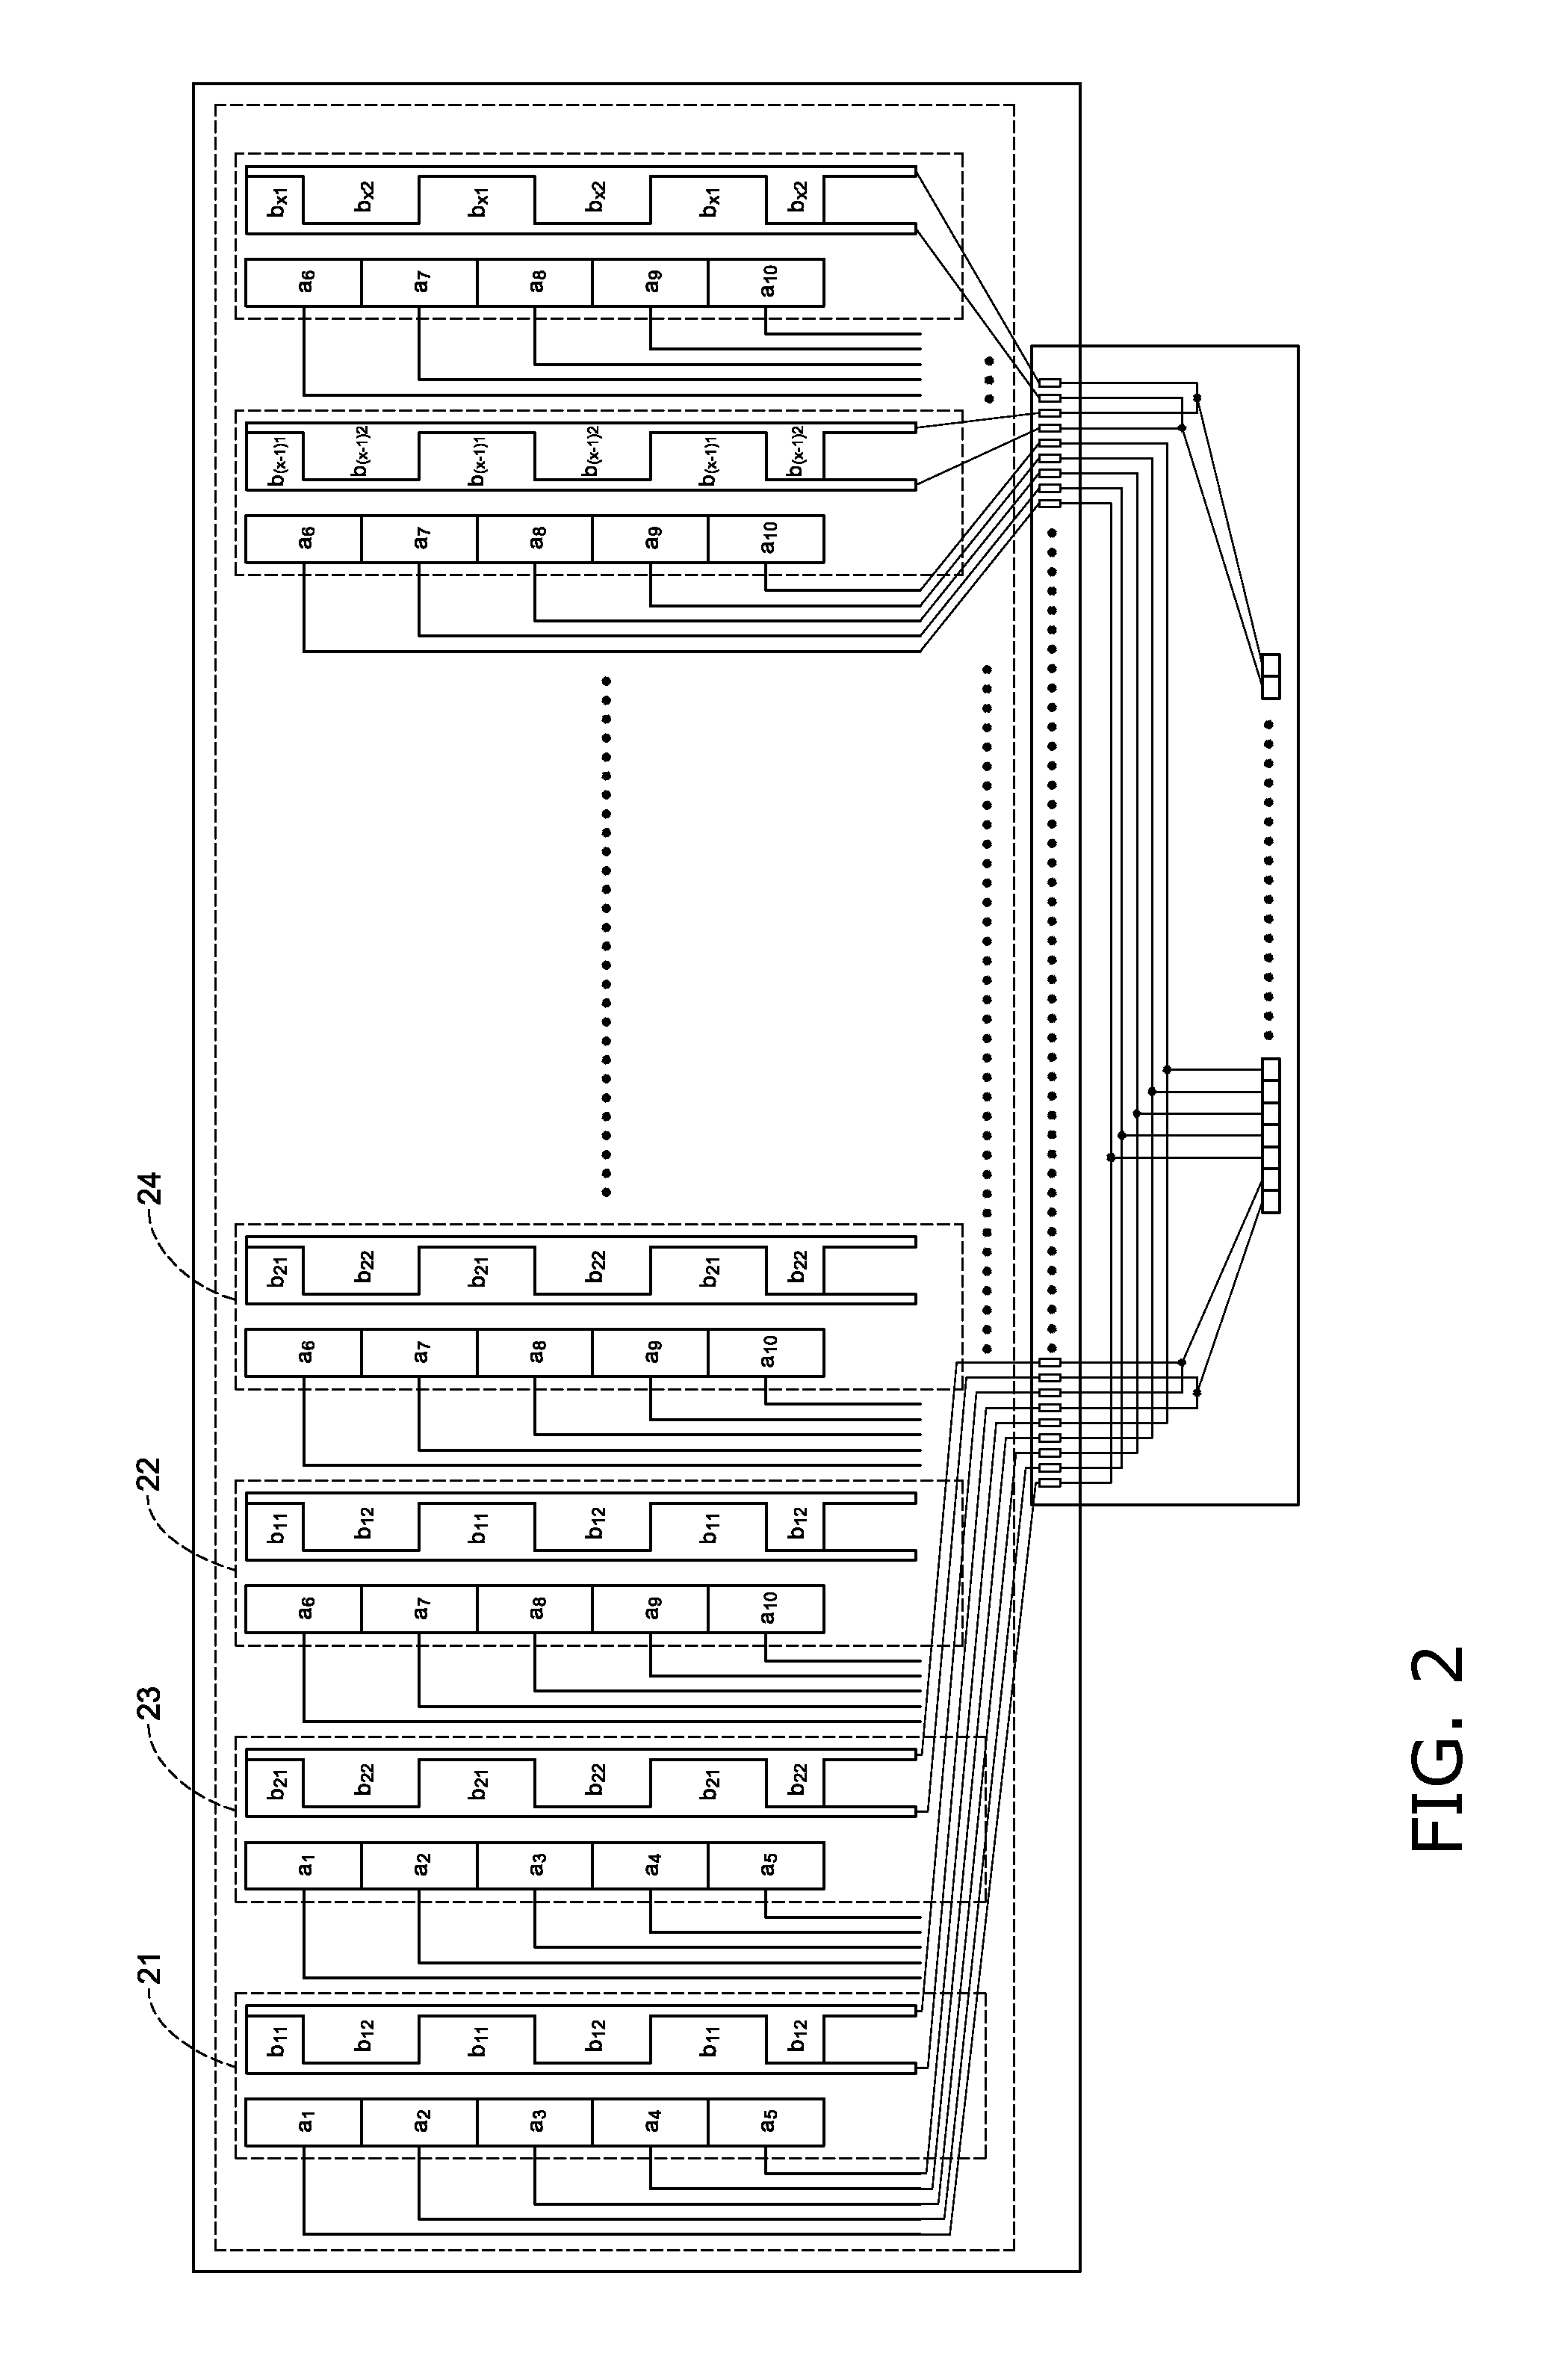 Capacitive touch panel with single sensing layer